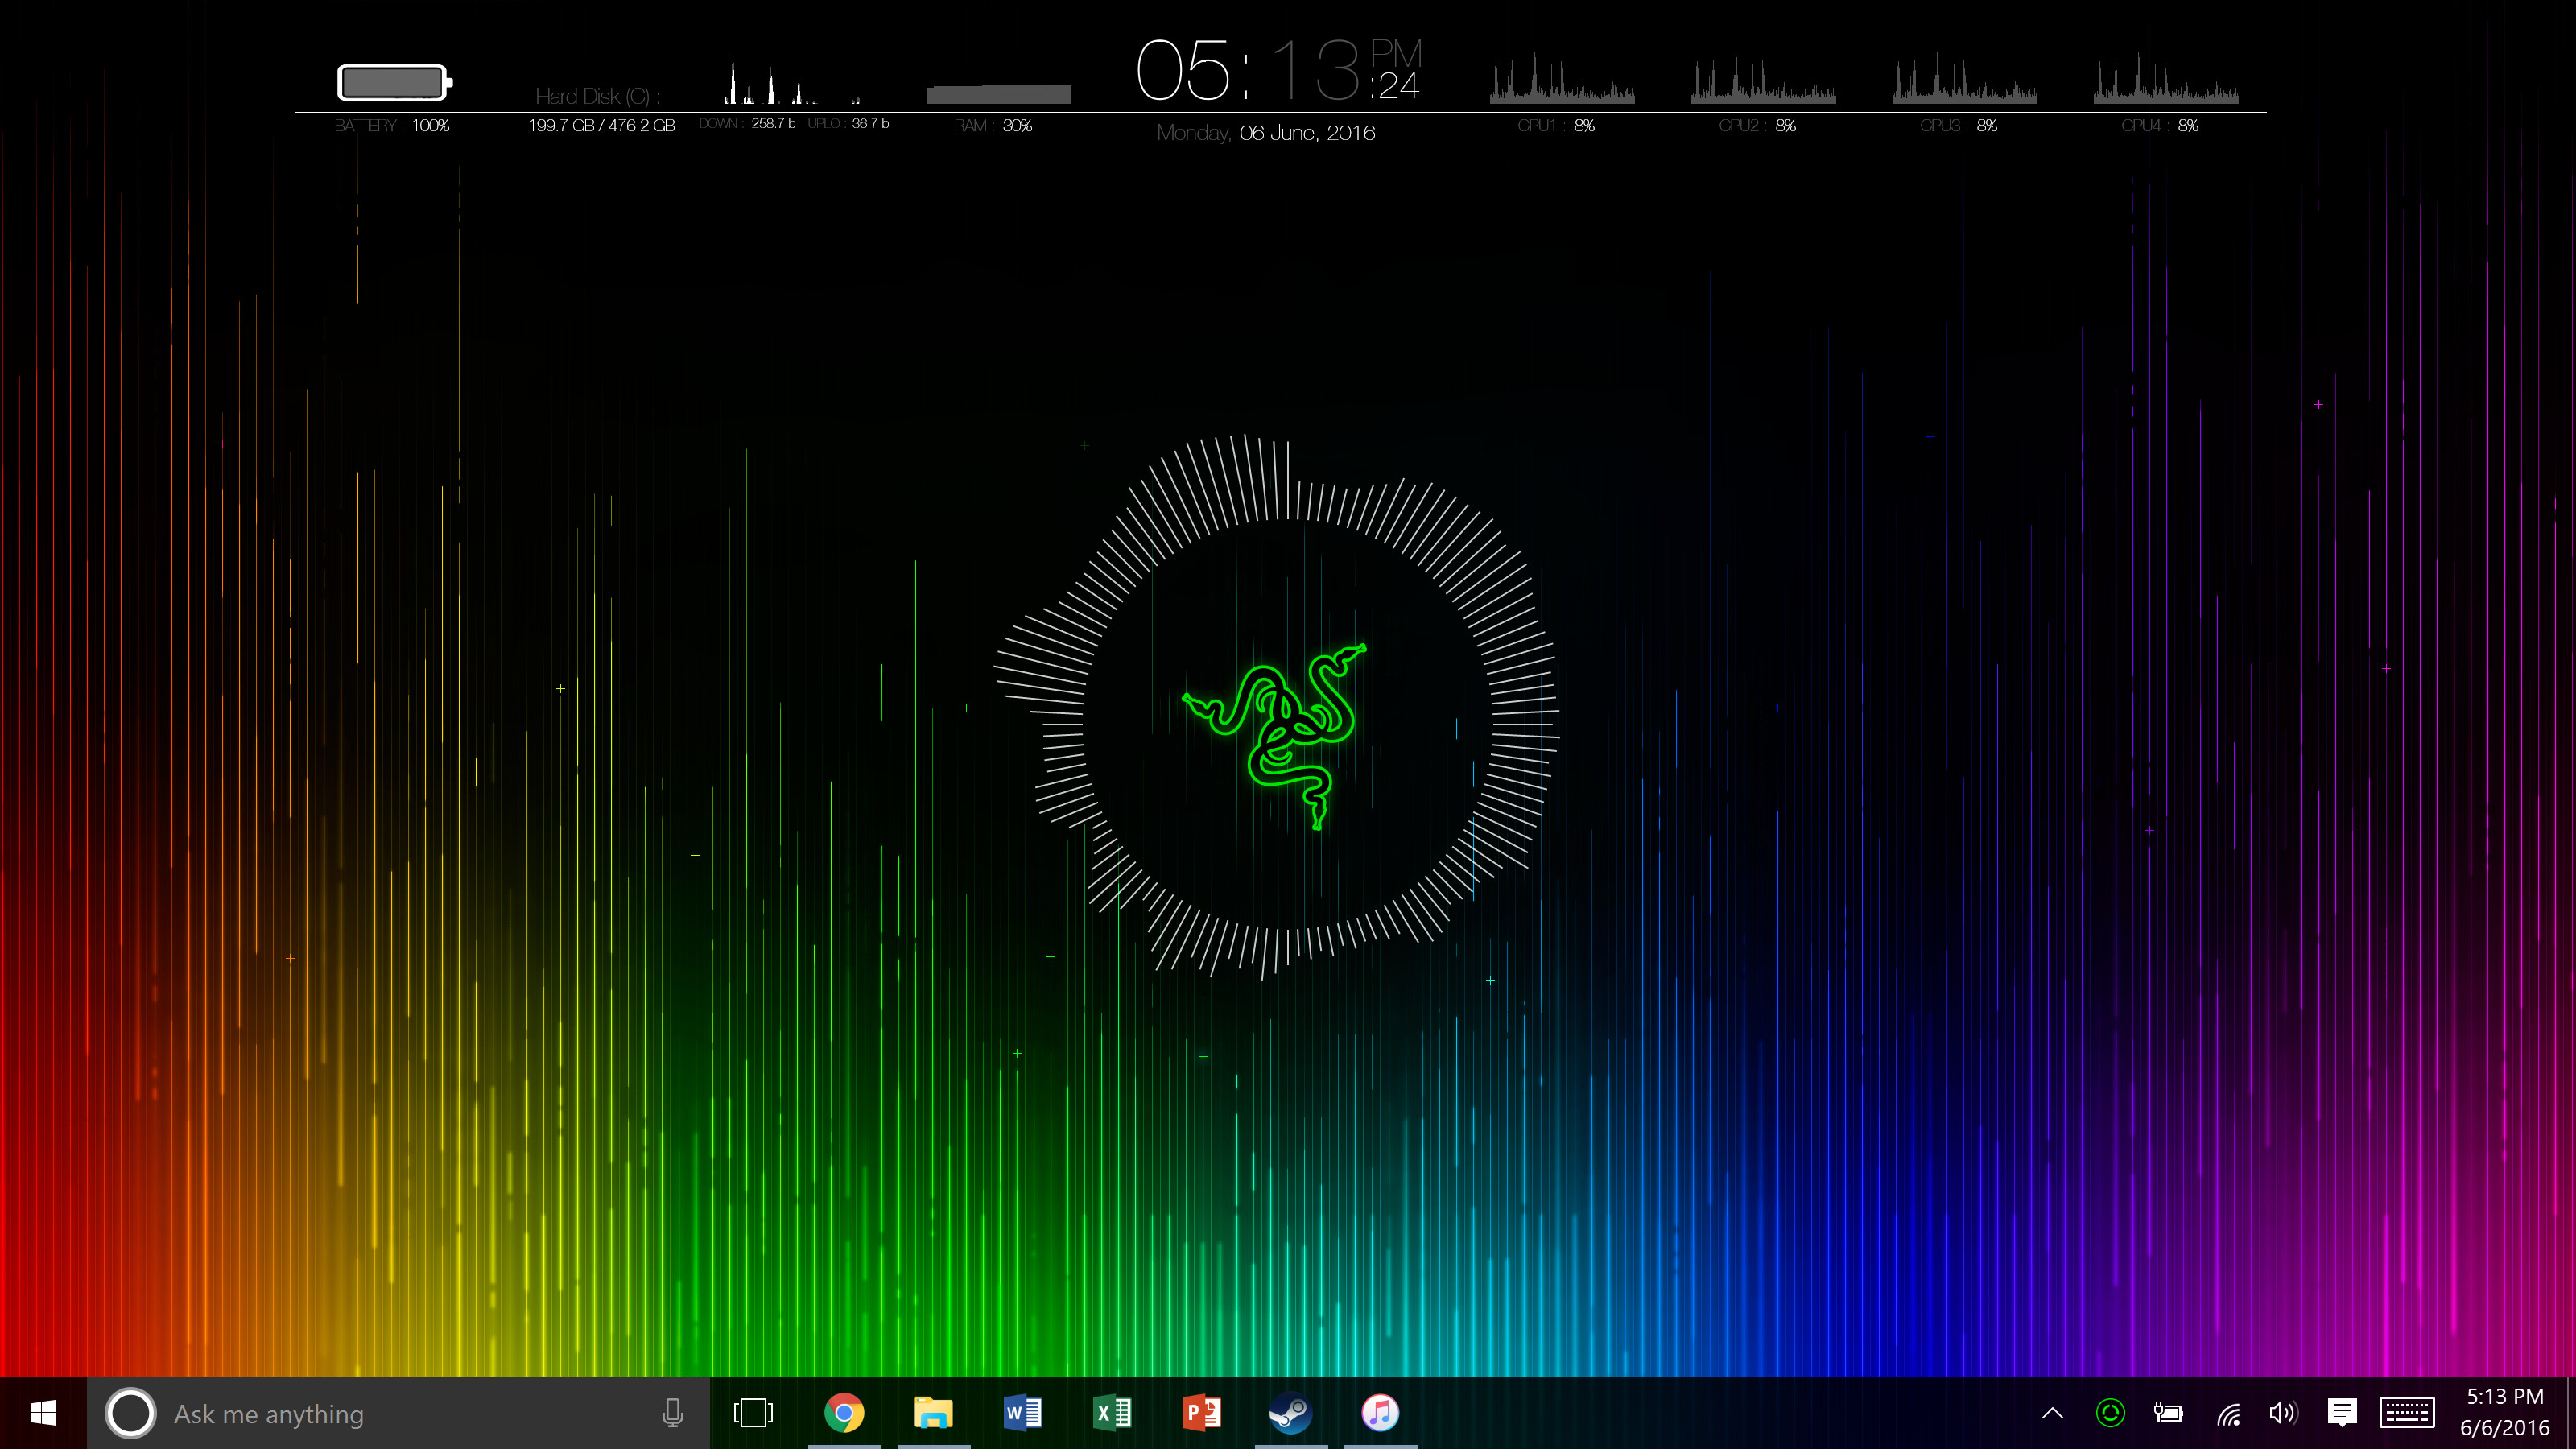 3200x1800 By default, my icons are hidden, and my desktop looks like this (the middle  is an audio visualizer):